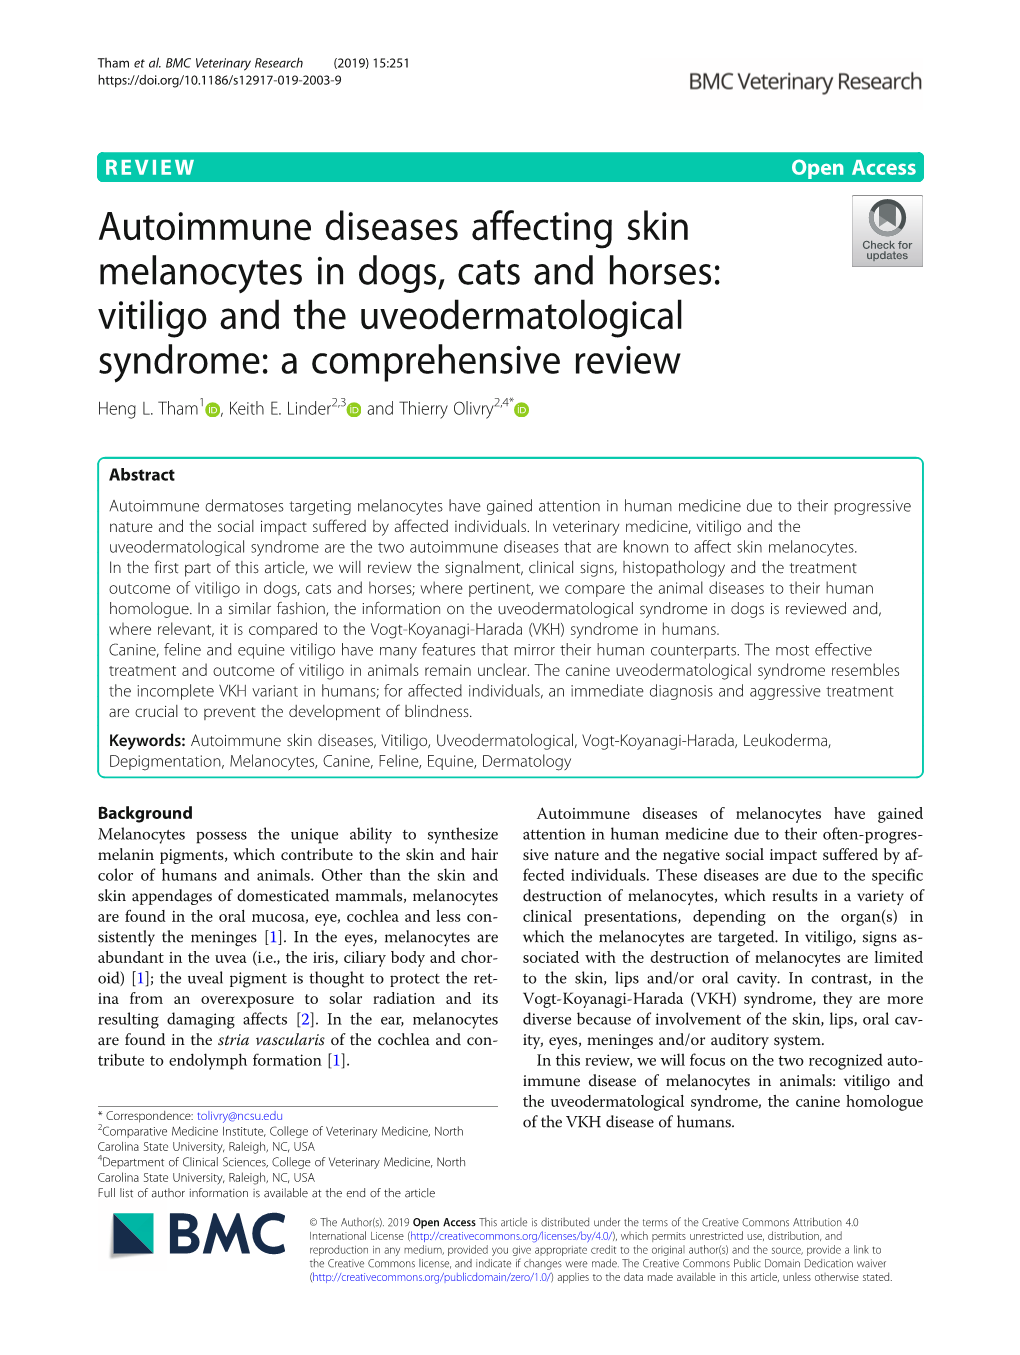 Autoimmune Diseases Affecting Skin Melanocytes in Dogs, Cats and Horses: Vitiligo and the Uveodermatological Syndrome: a Comprehensive Review Heng L